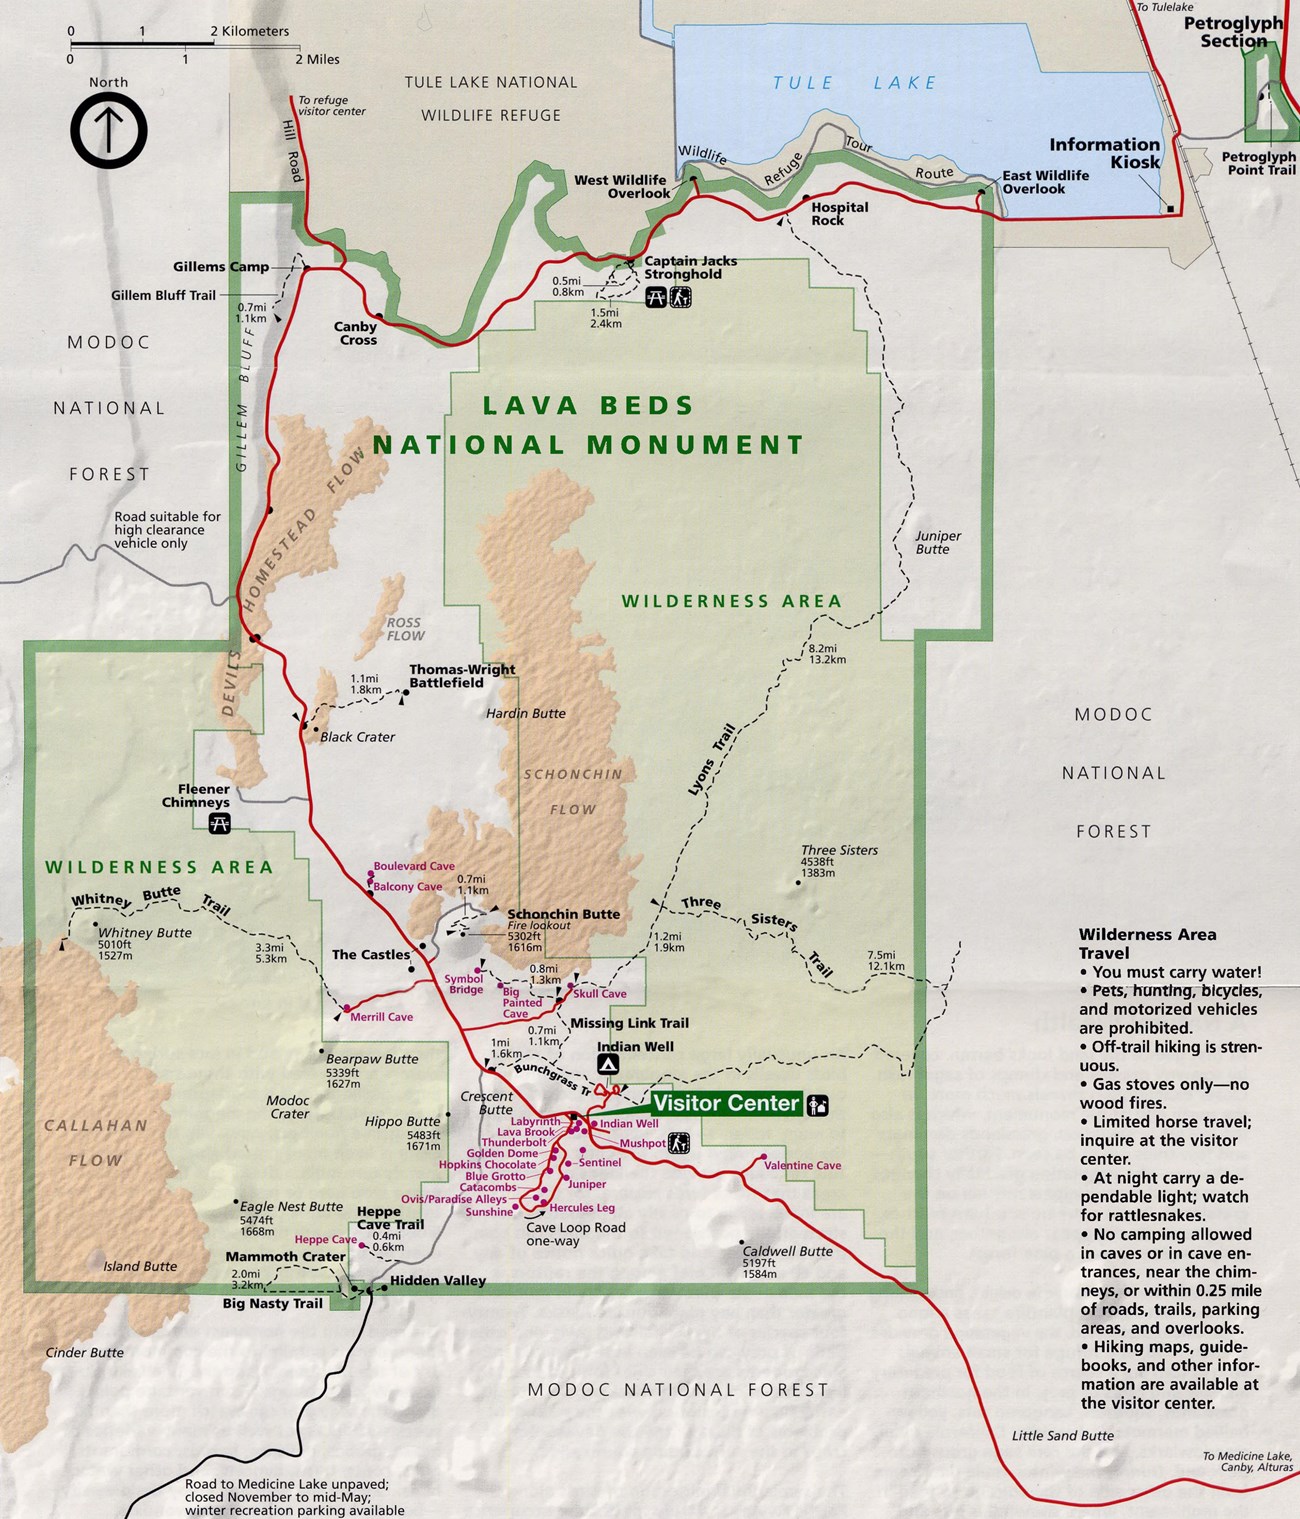 Park Map showing all roads and major landmarks